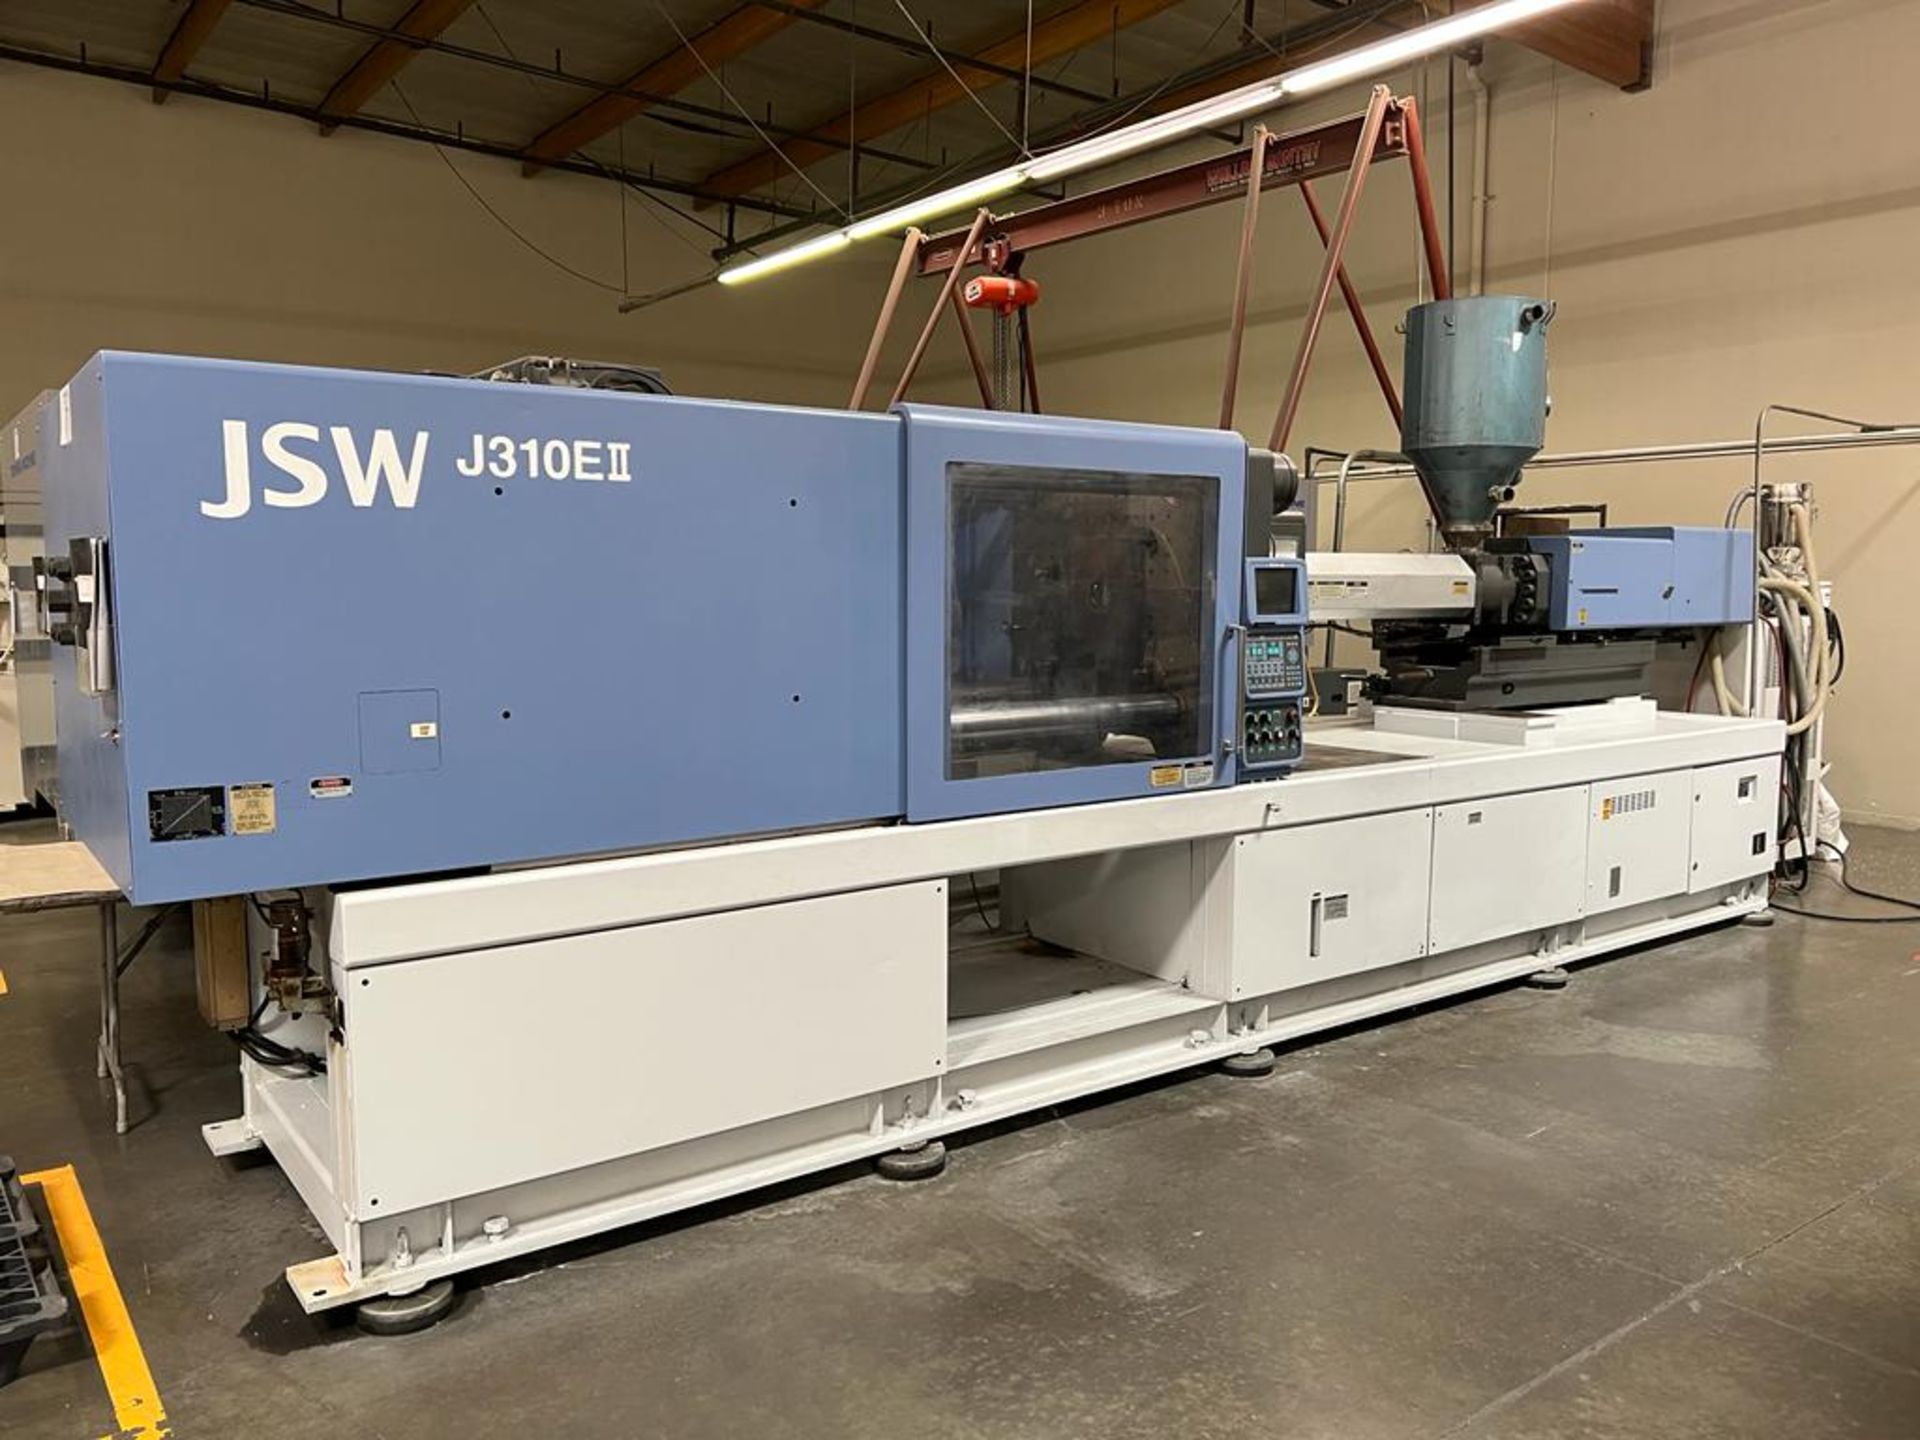 JSW MODEL 310E II, 310 TON PLASTIC INJECTION MOLDING MACHINE, 22.44’’, 64.69 Shot Size. SOLD AS-IS